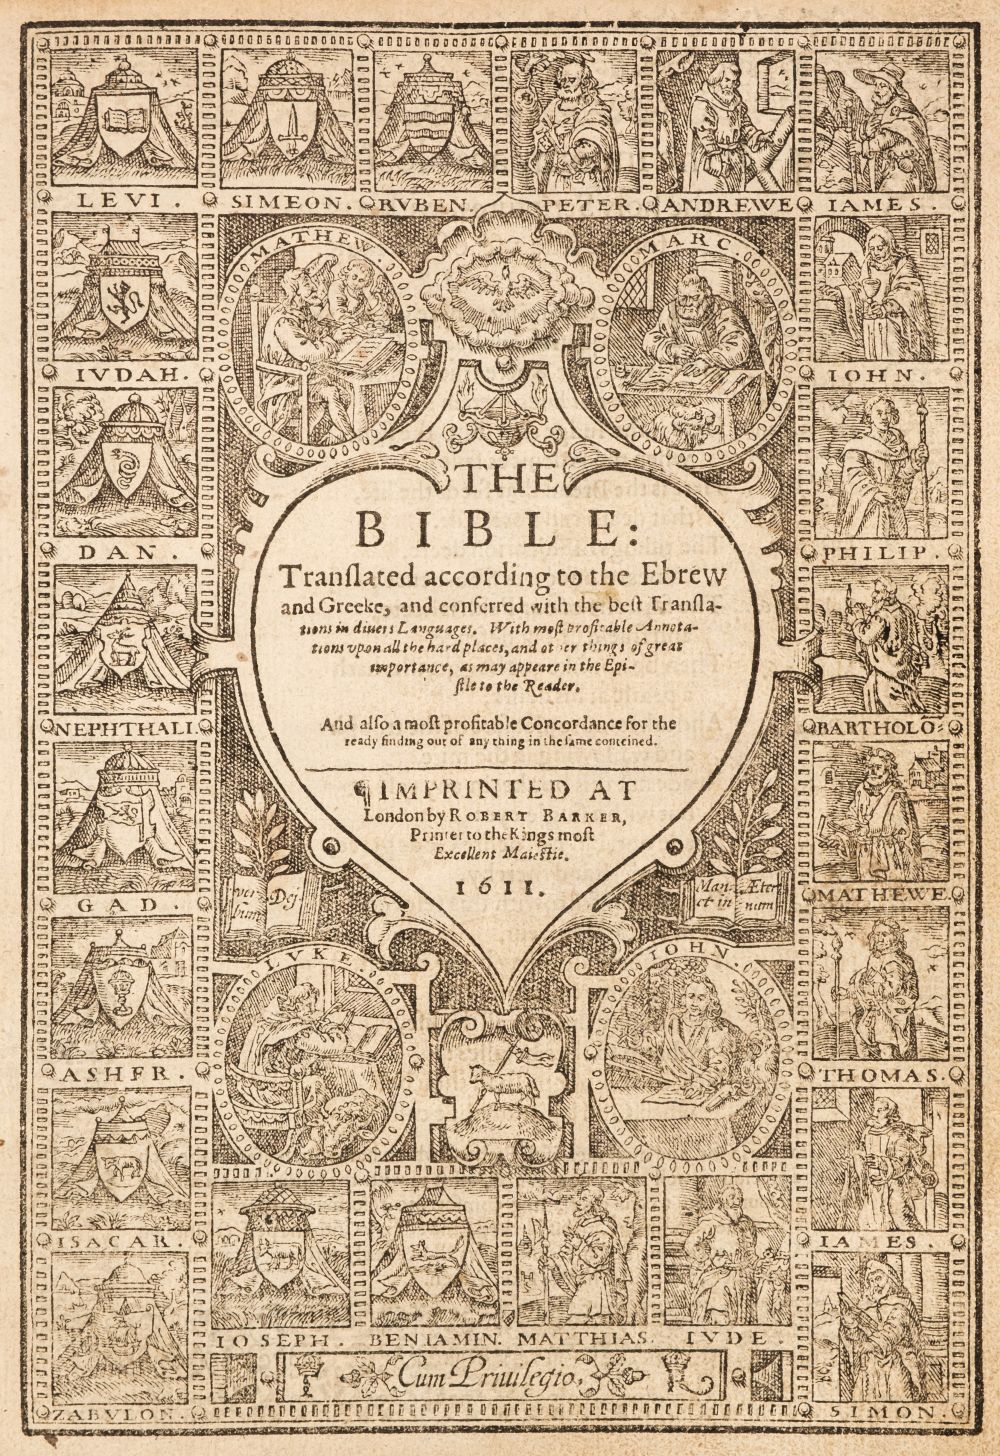 Bible [English]. The Bible: Translated according to the Ebrew and Greeke..., 1611